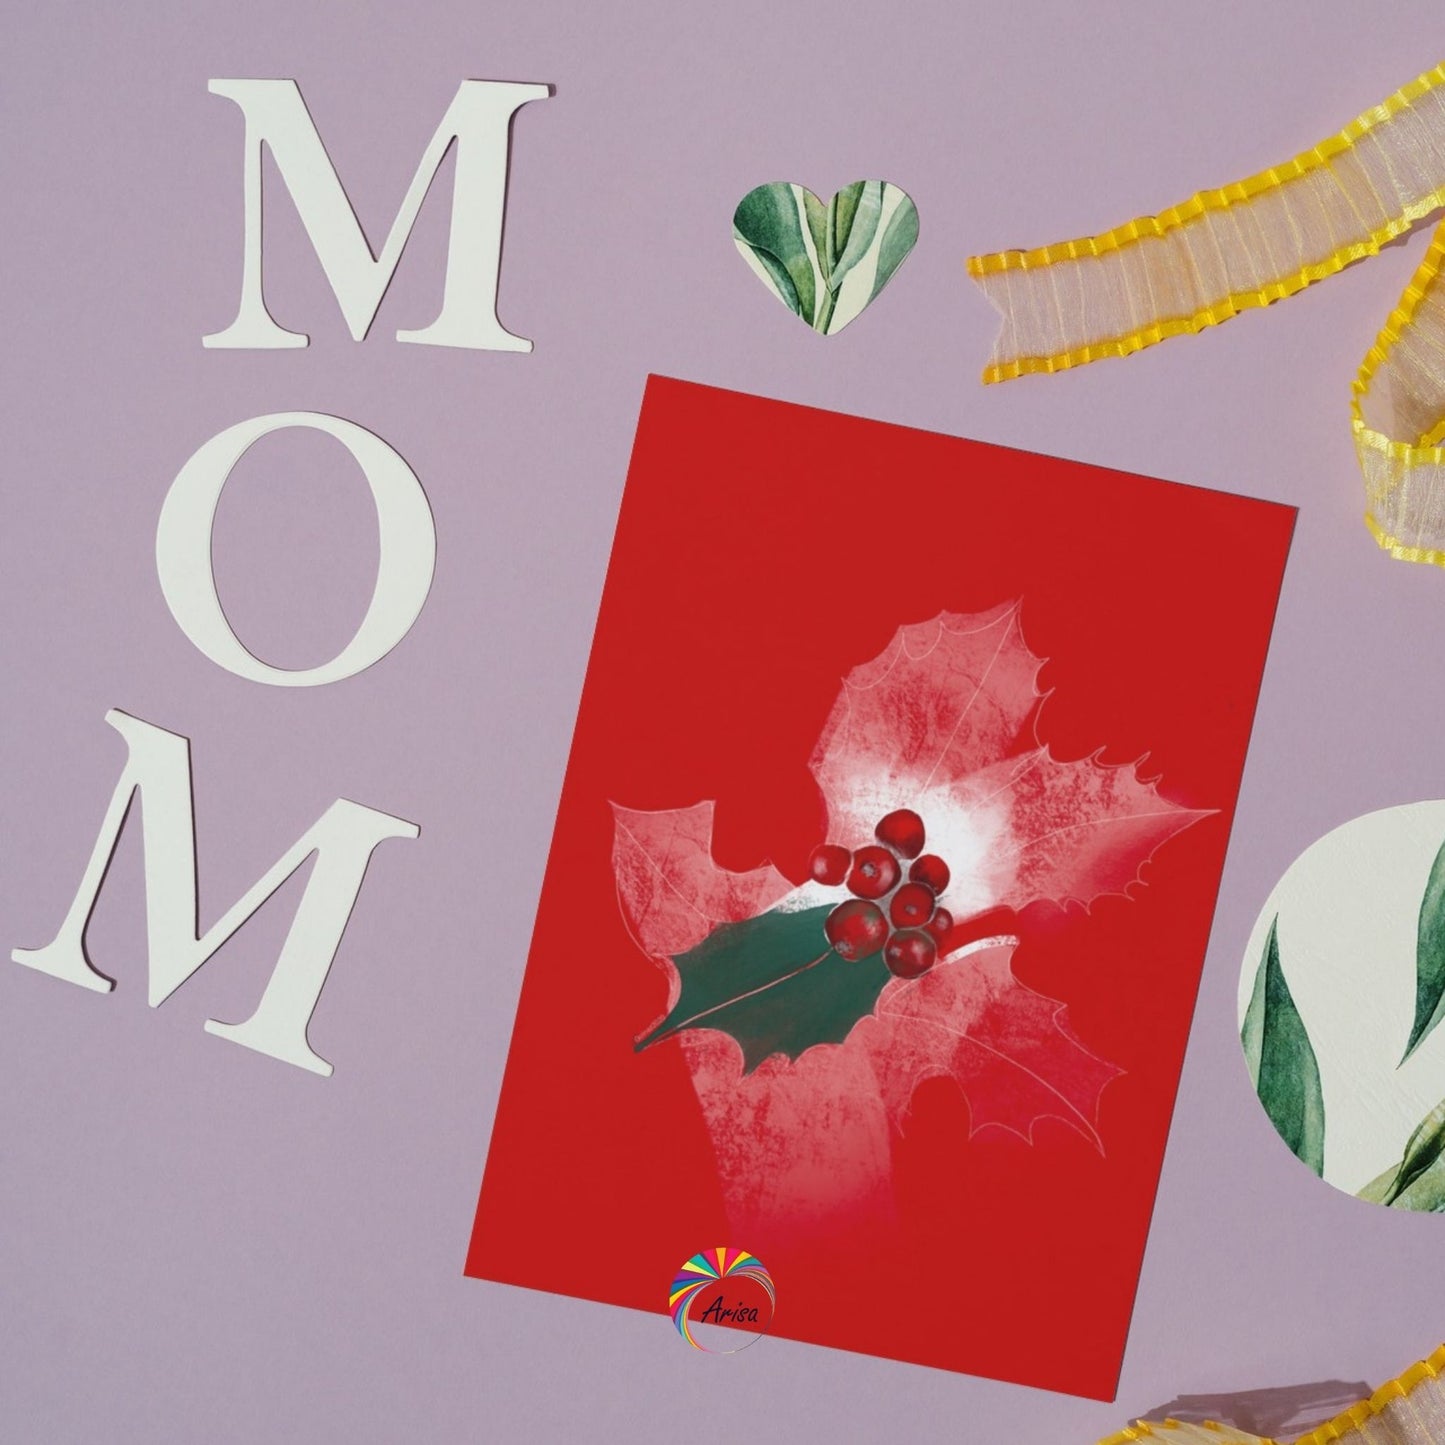 "Holly" Greeting Card by ArisaTeam with the word mom close to the card ideal as a Mother's Day card.